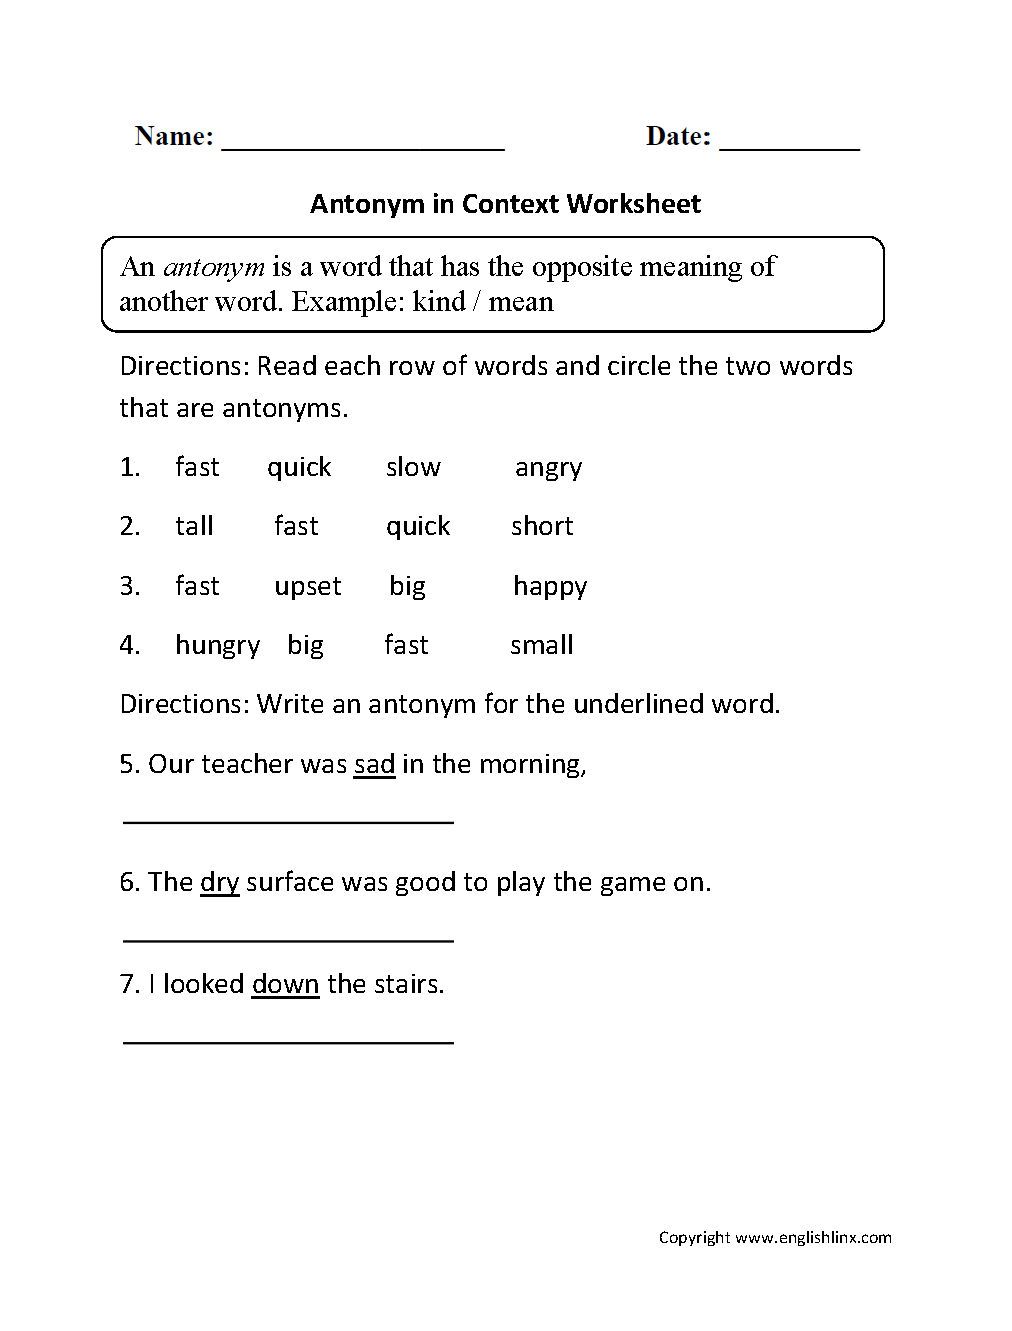 17-best-images-of-synonym-antonym-worksheet-6th-grade-synonyms-and-antonyms-worksheets